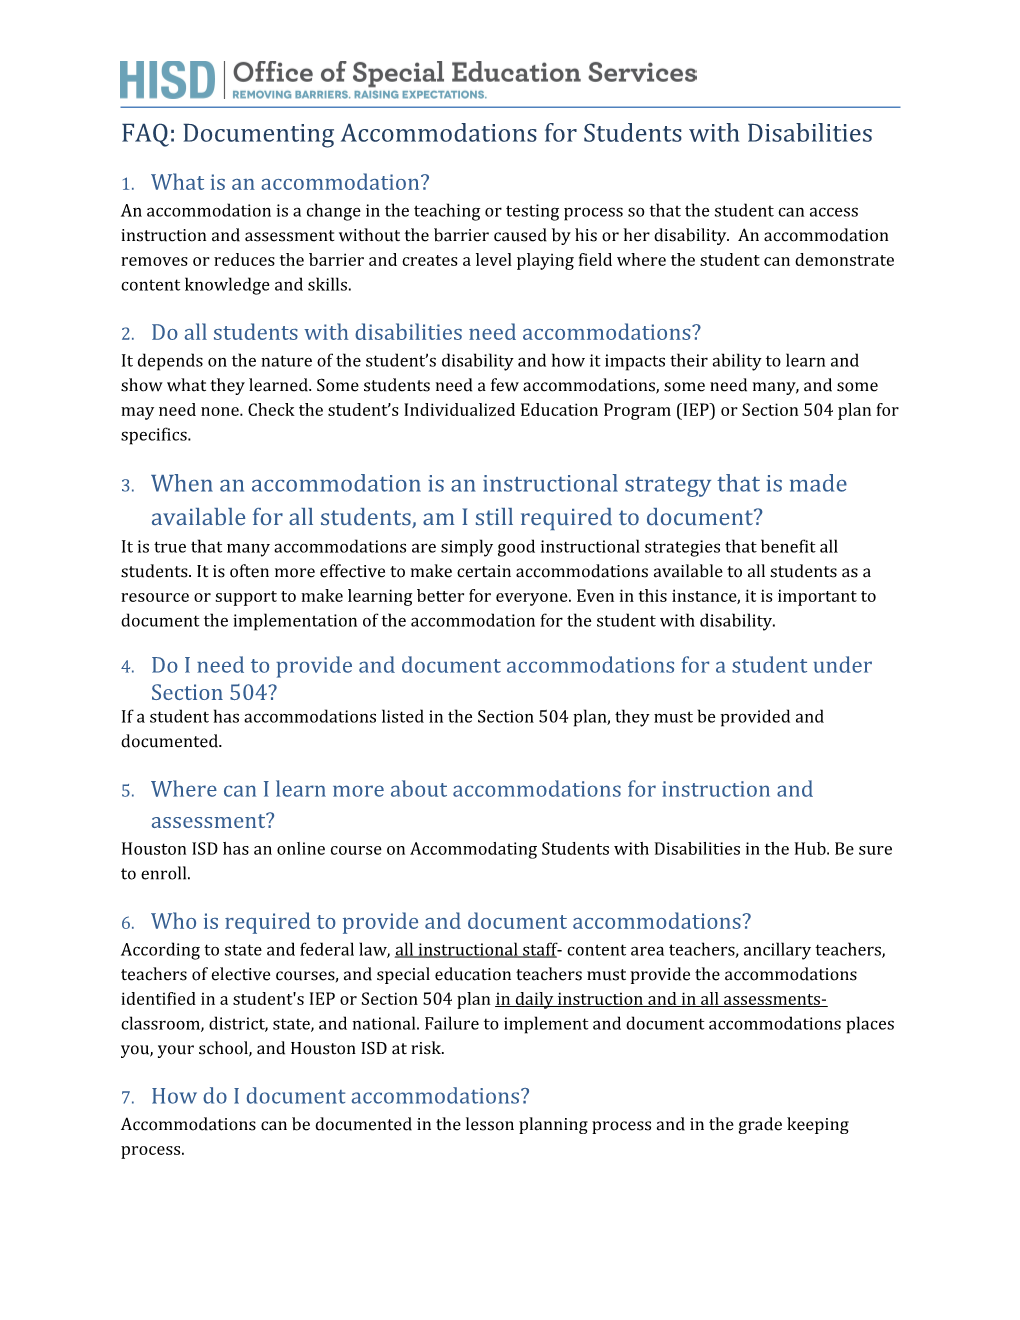 FAQ: Documenting Accommodations for Students with Disabilities